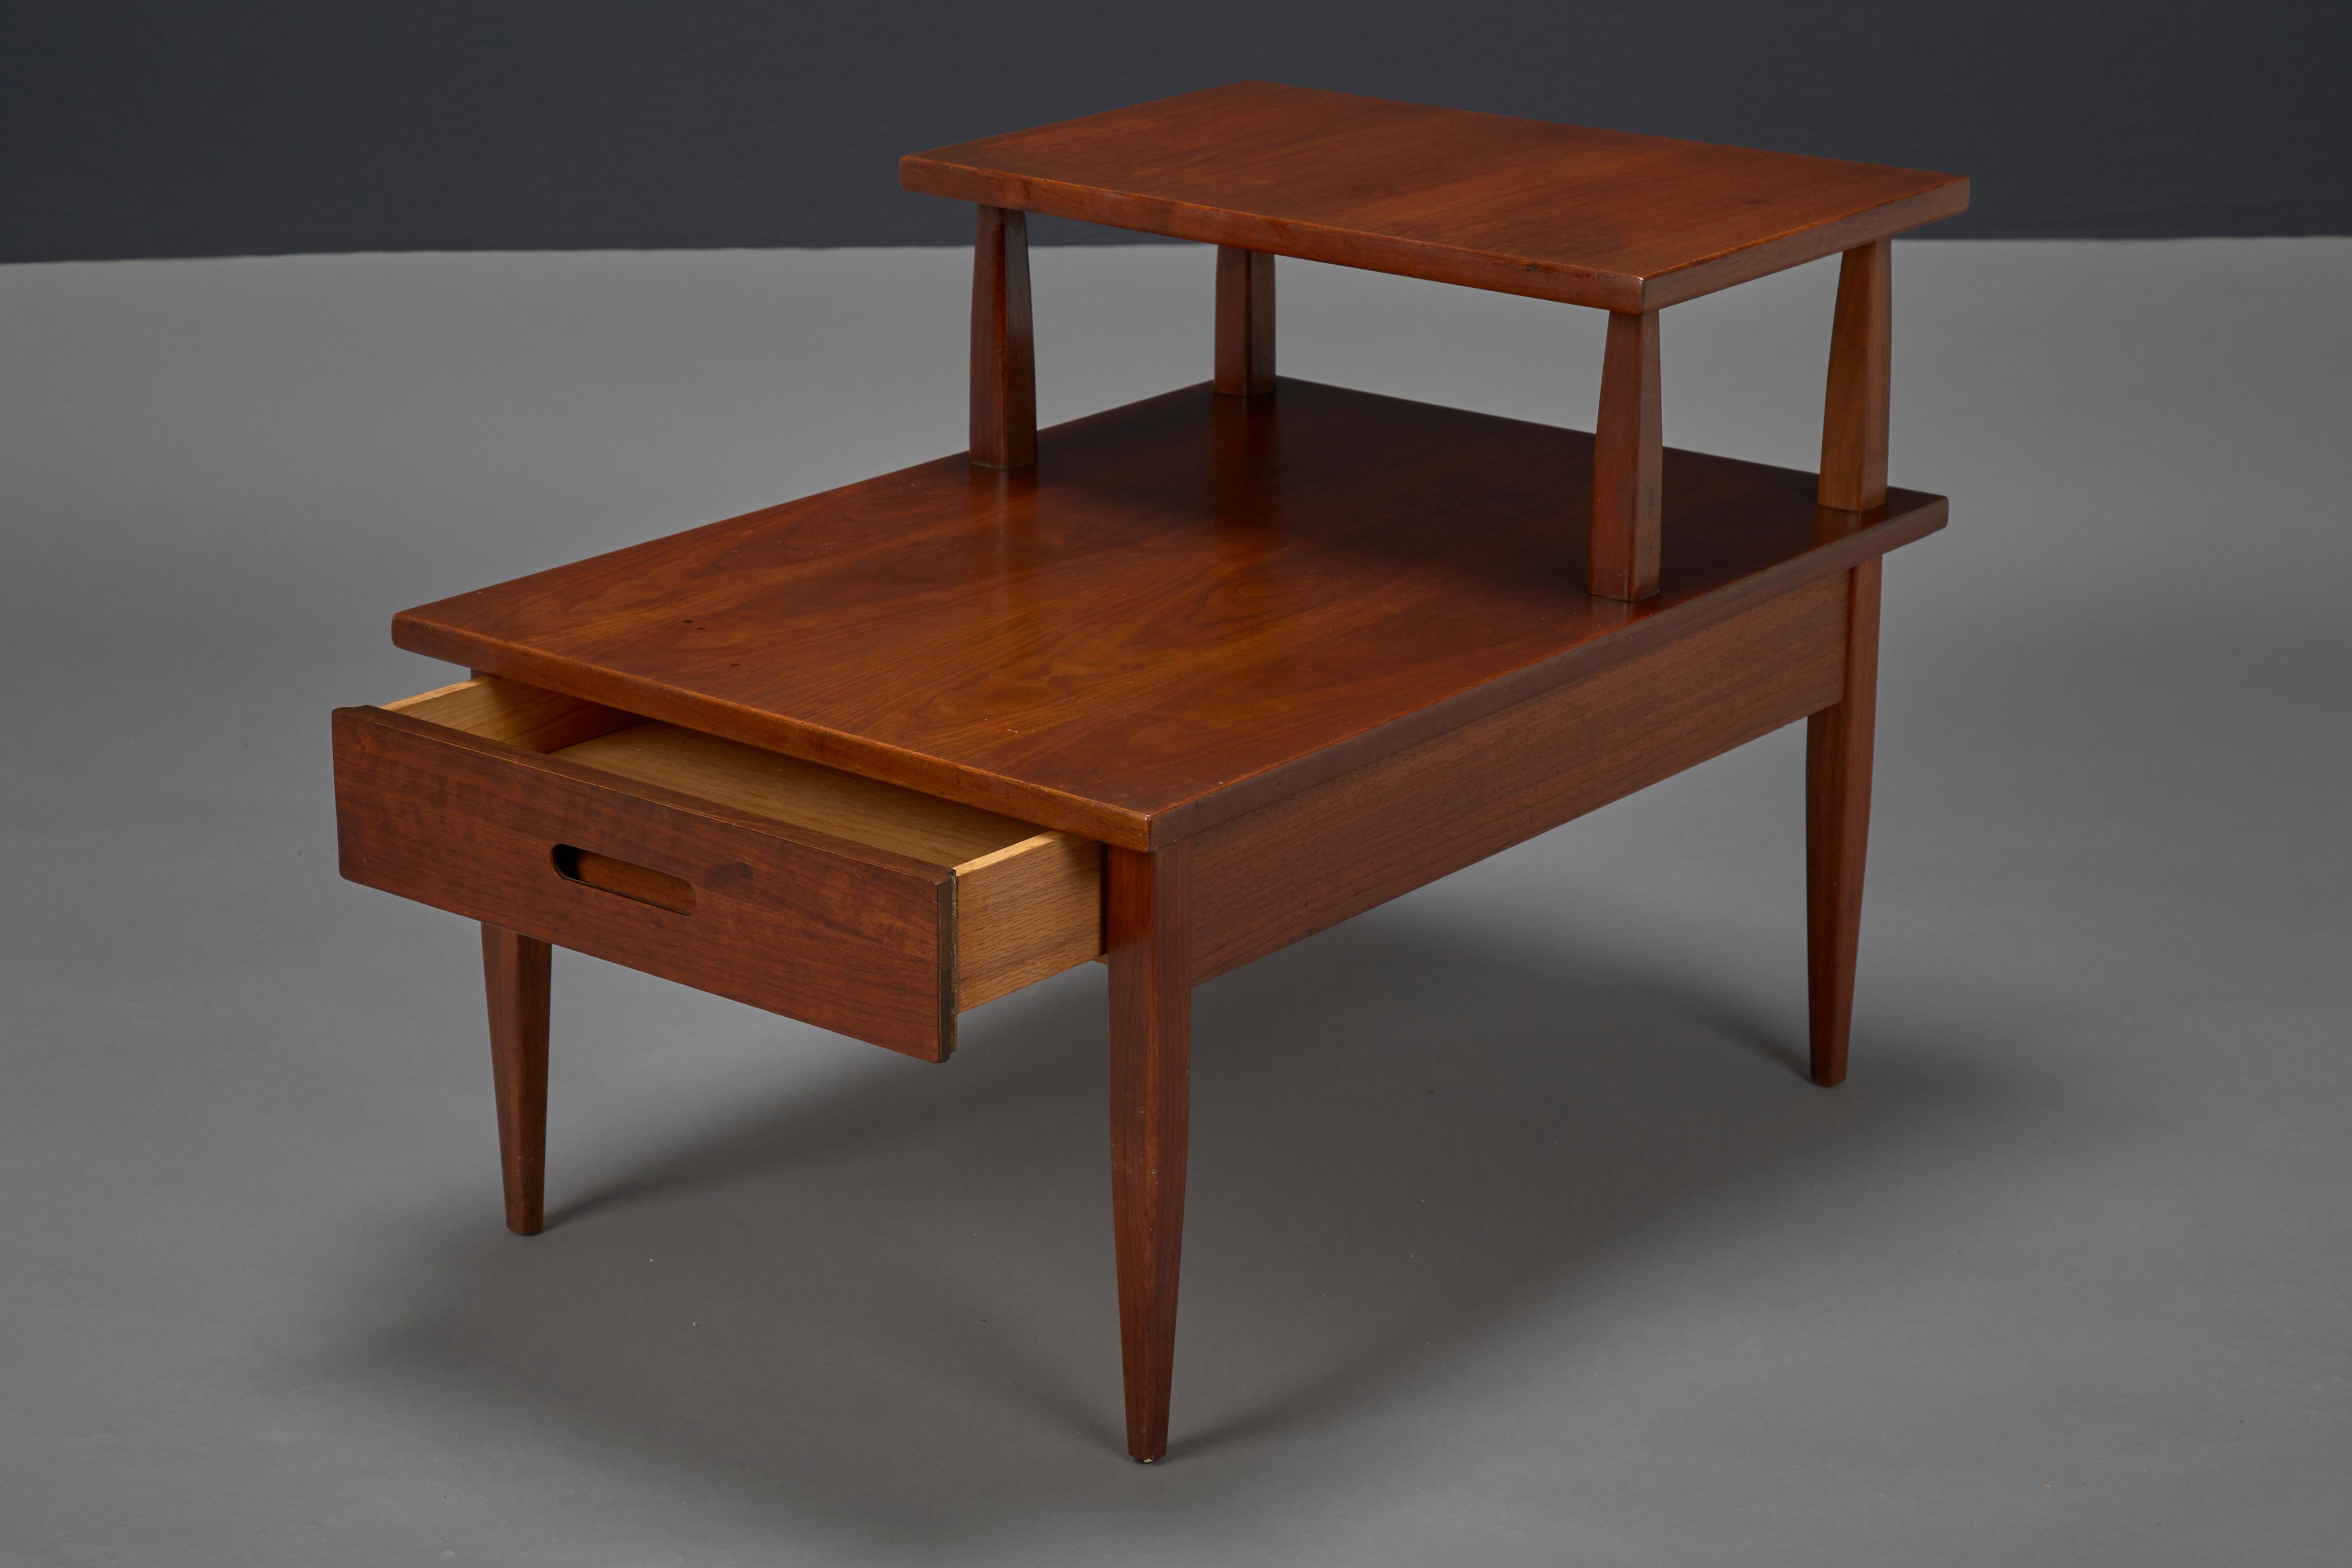 Mid-Century Modern Walnut Two-Tiered Side Table Attributed to T.H. Robsjohn-Gibbings for Widdicomb